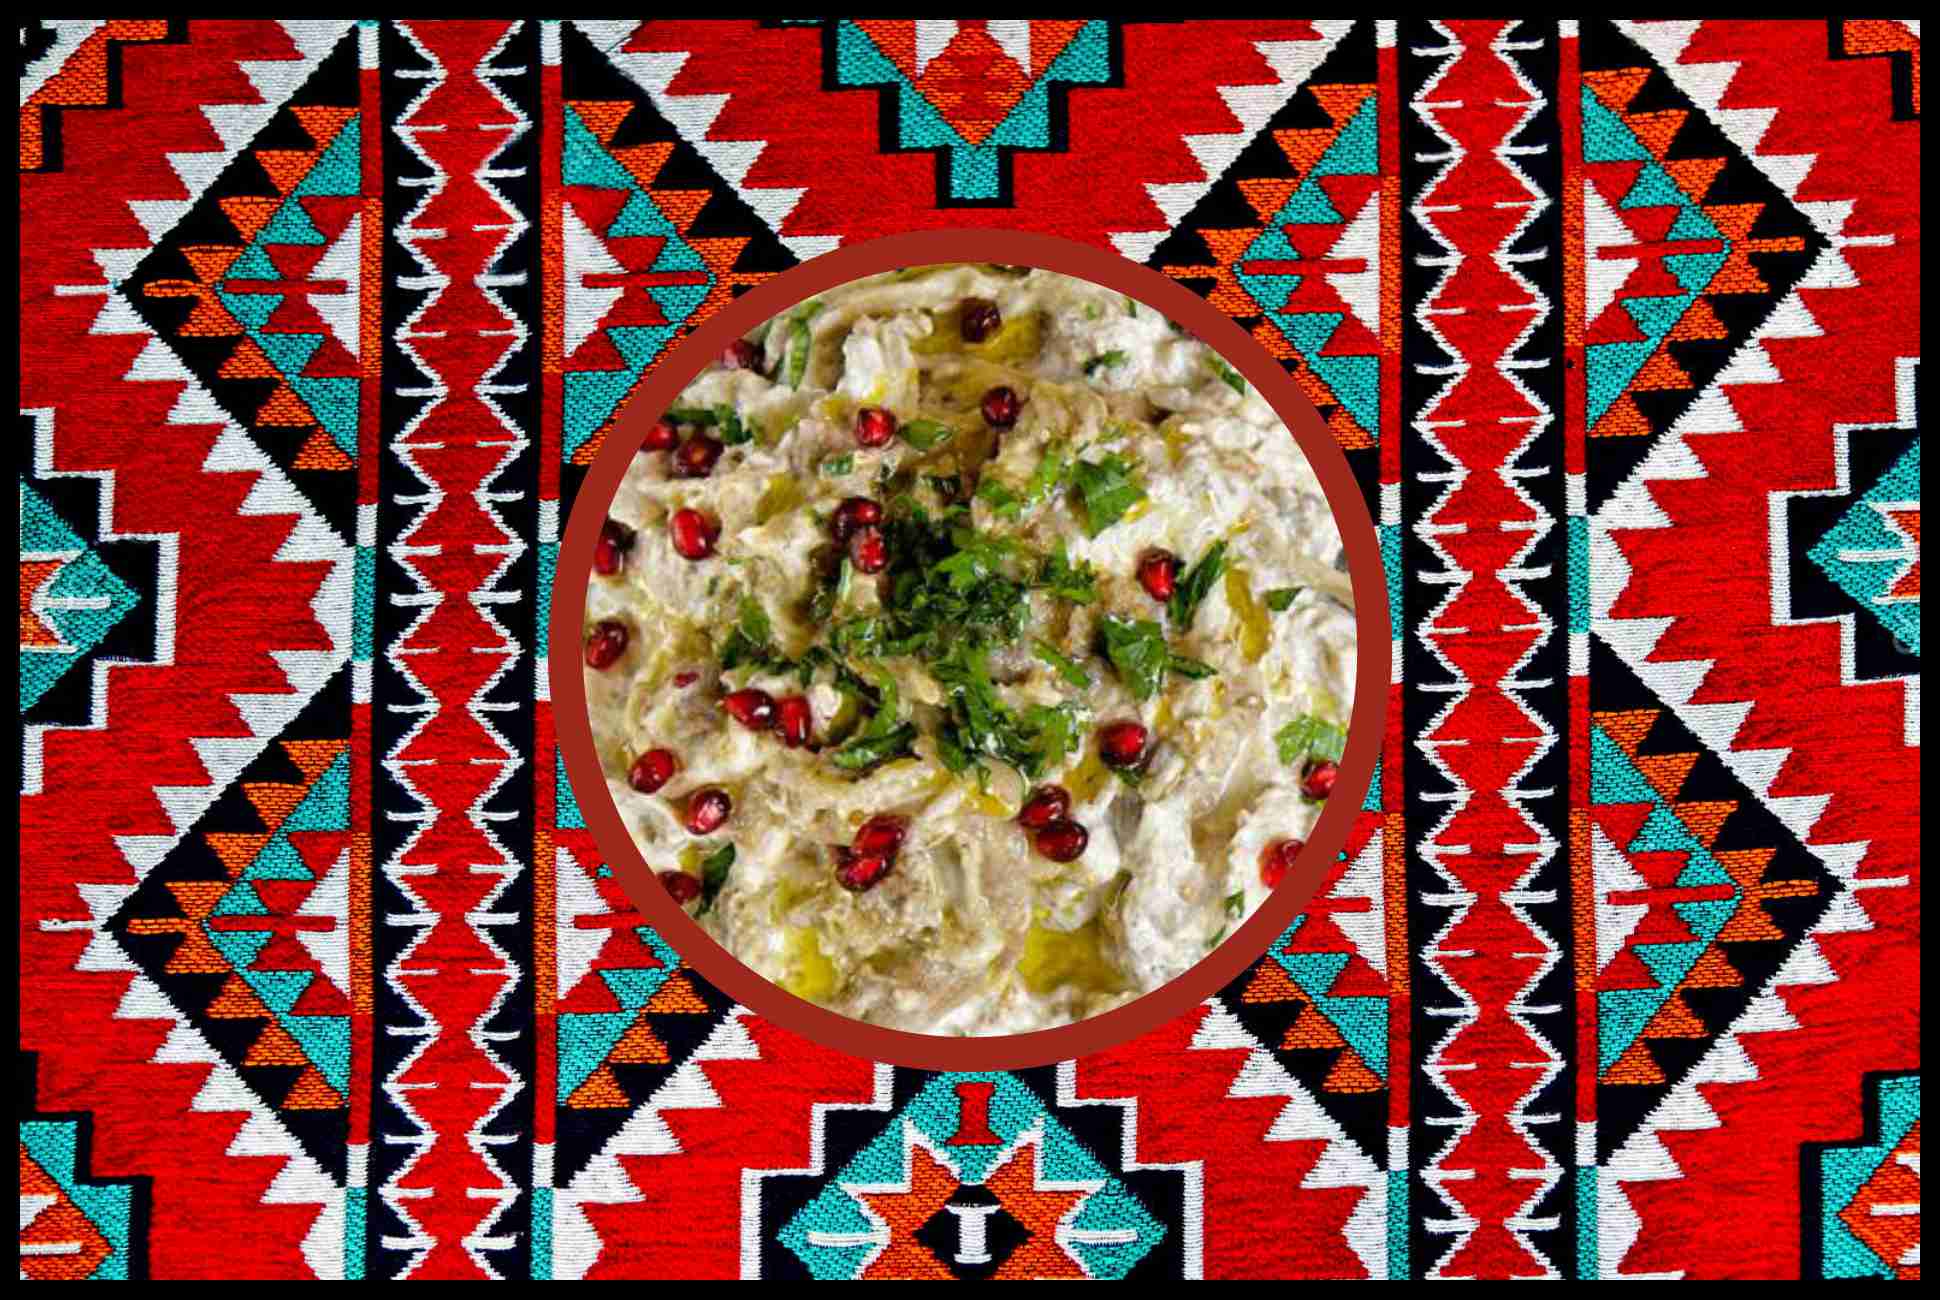 Roasted eggplant dip; Finely chopped vegetables; My Mom's Recipe; Petra cuisine; Garlic-infused dip; Tahini paste; Lemon juice dressing; Virgin olive oil; Petra culinary experience; Middle Eastern flavors; Petra gastronomy; Healthy eggplant dip; Authentic Petra recipe; Petra culinary heritage; My Mom's Kitchen specialty; Mediterranean-inspired dip; Petra roasted eggplant; Traditional Middle Eastern dip; Petra-inspired cuisine; Arabic mezza; aubergine